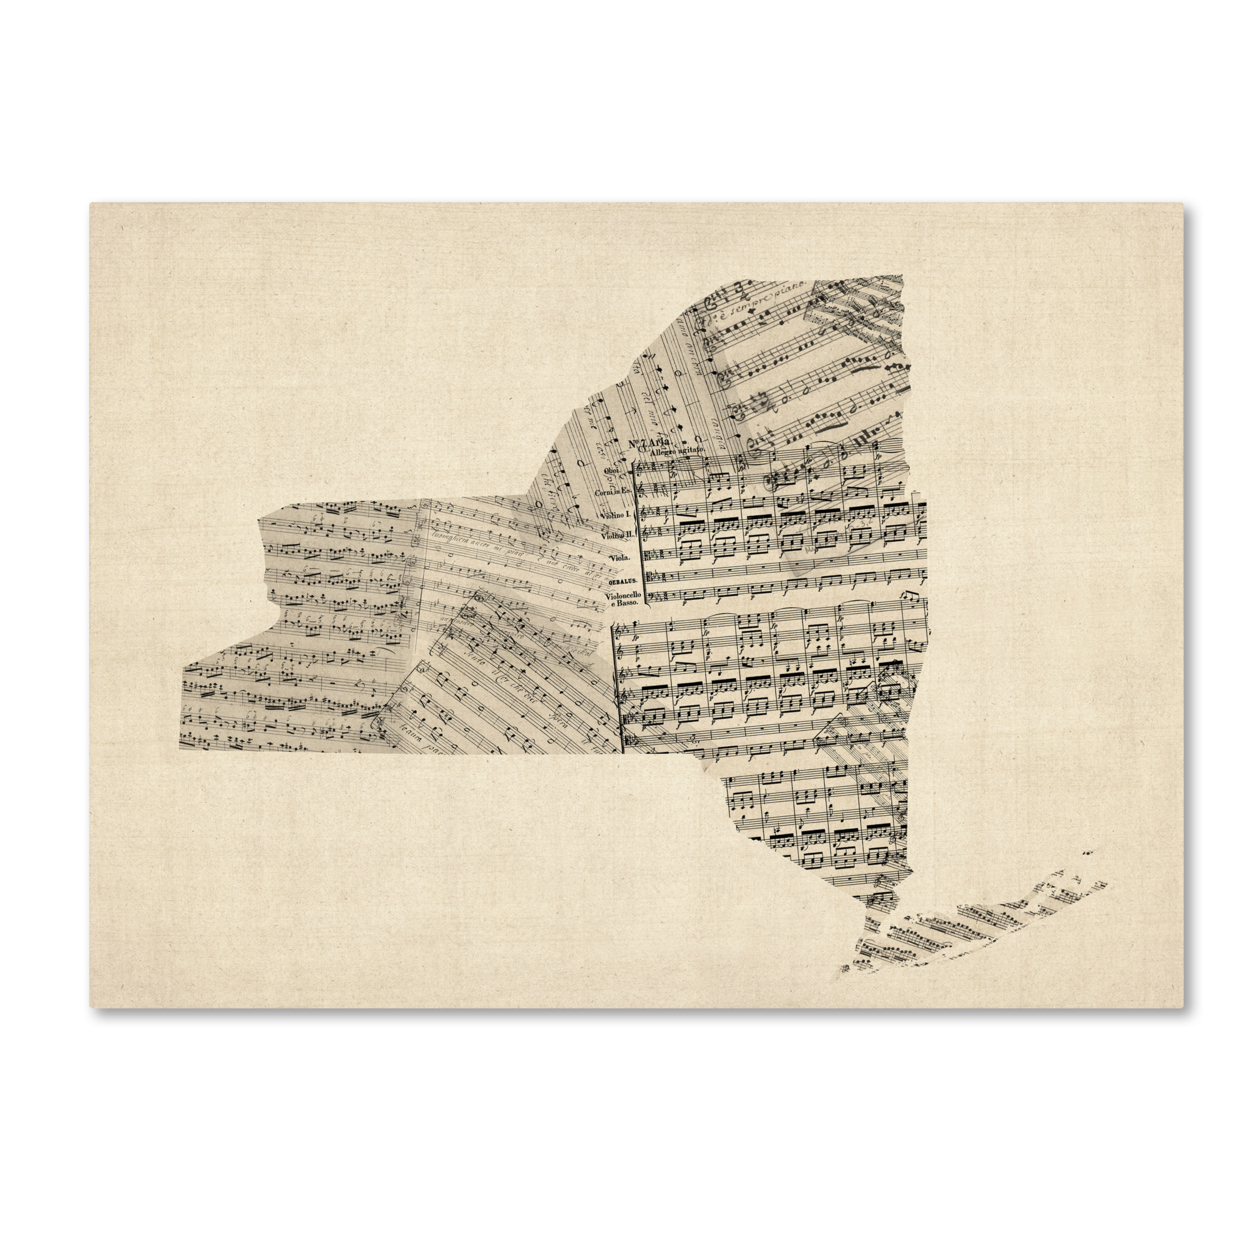 Michael Tompsett 'Old Sheet Music Map Of New York State' Canvas Wall Art 35 X 47 Inches